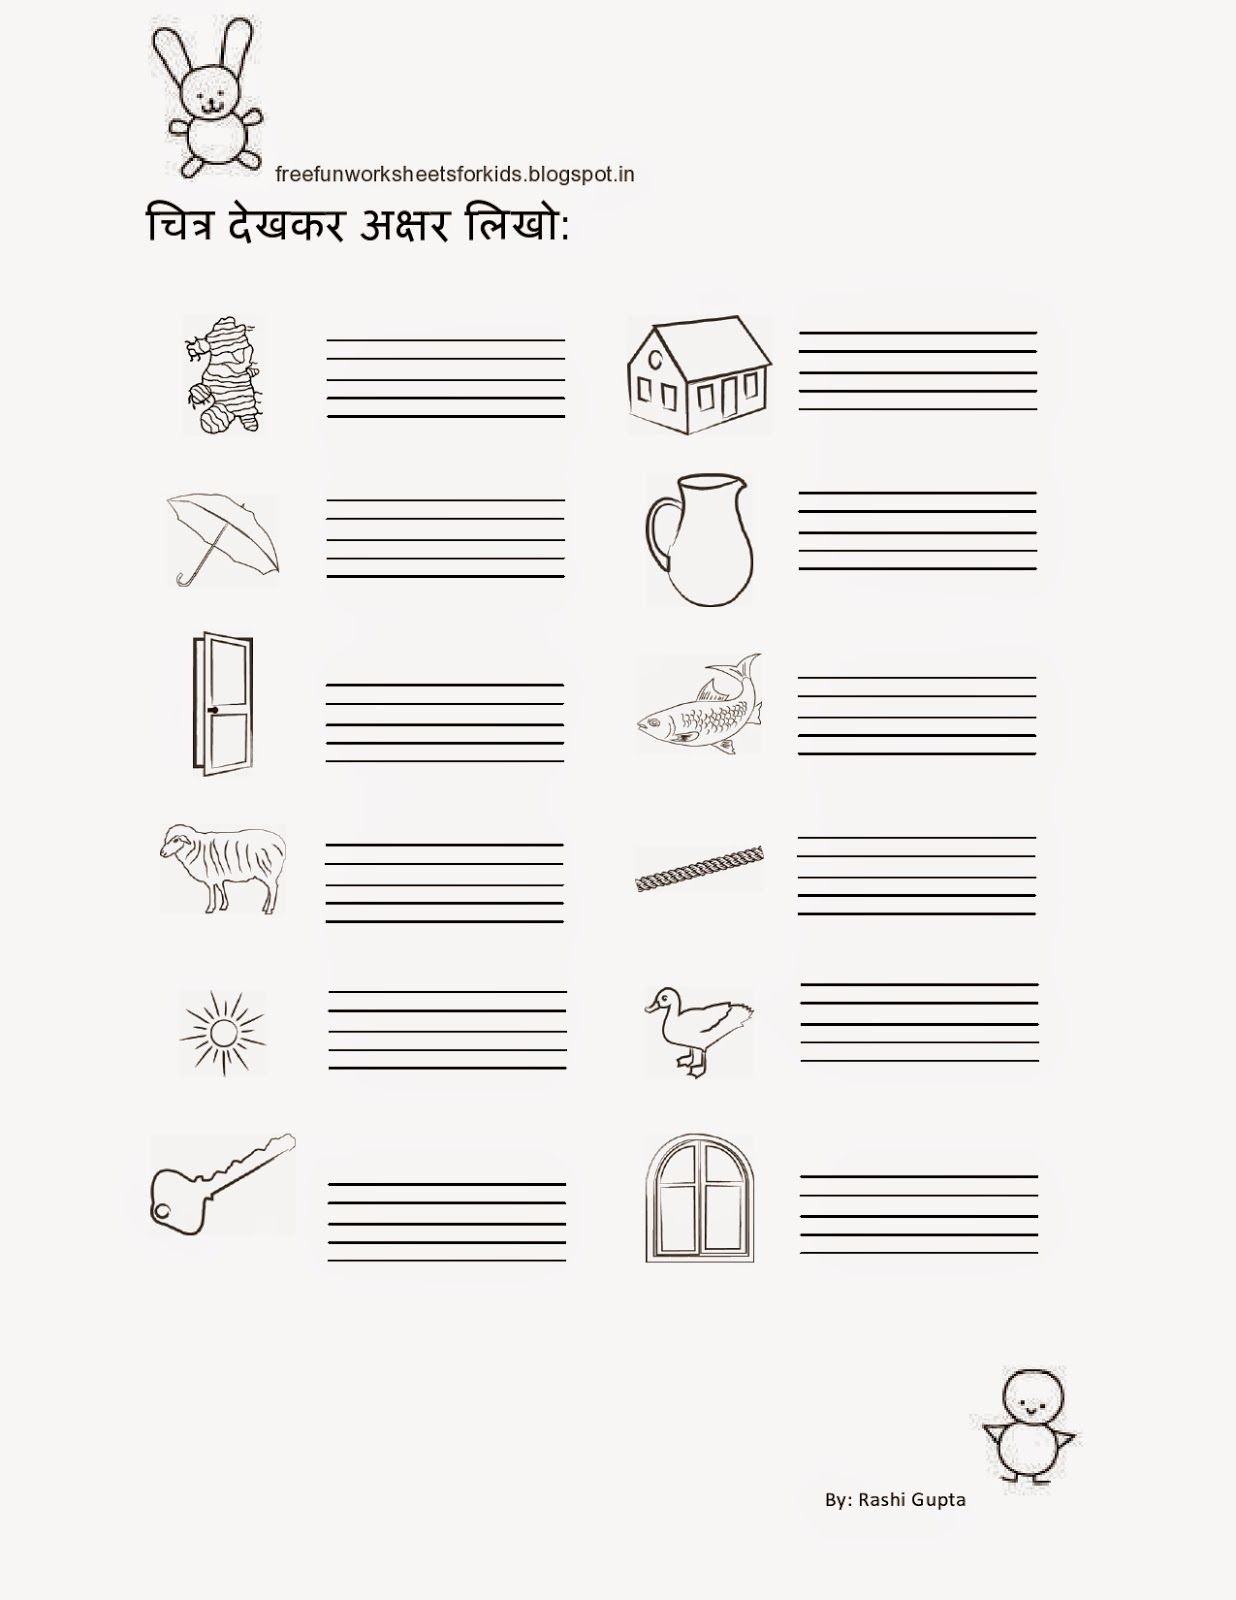 Free Fun Worksheets For Kids: Free Printable Fun Hindi Worksheets - Free Printable Hindi Comprehension Worksheets For Grade 3